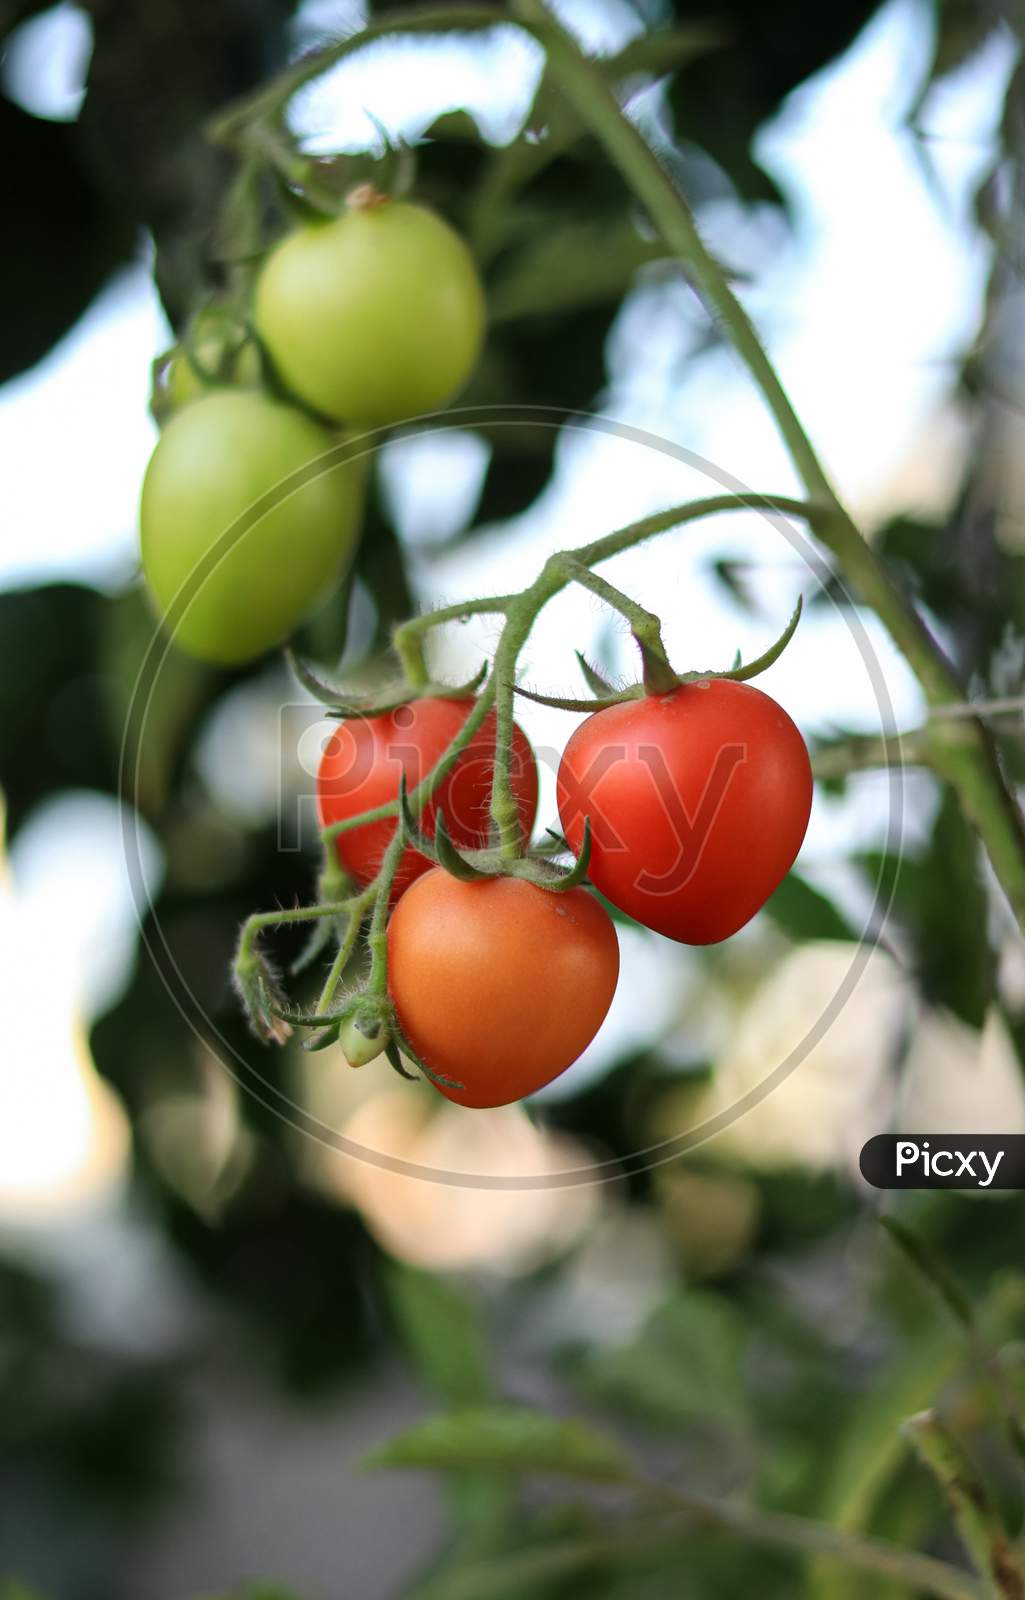 Fresh Ripe Red Tomatoes And Some Tomatoes That Are Not Ripe Yet Hanging On The Vine Of A Tomato Plant In The Garden